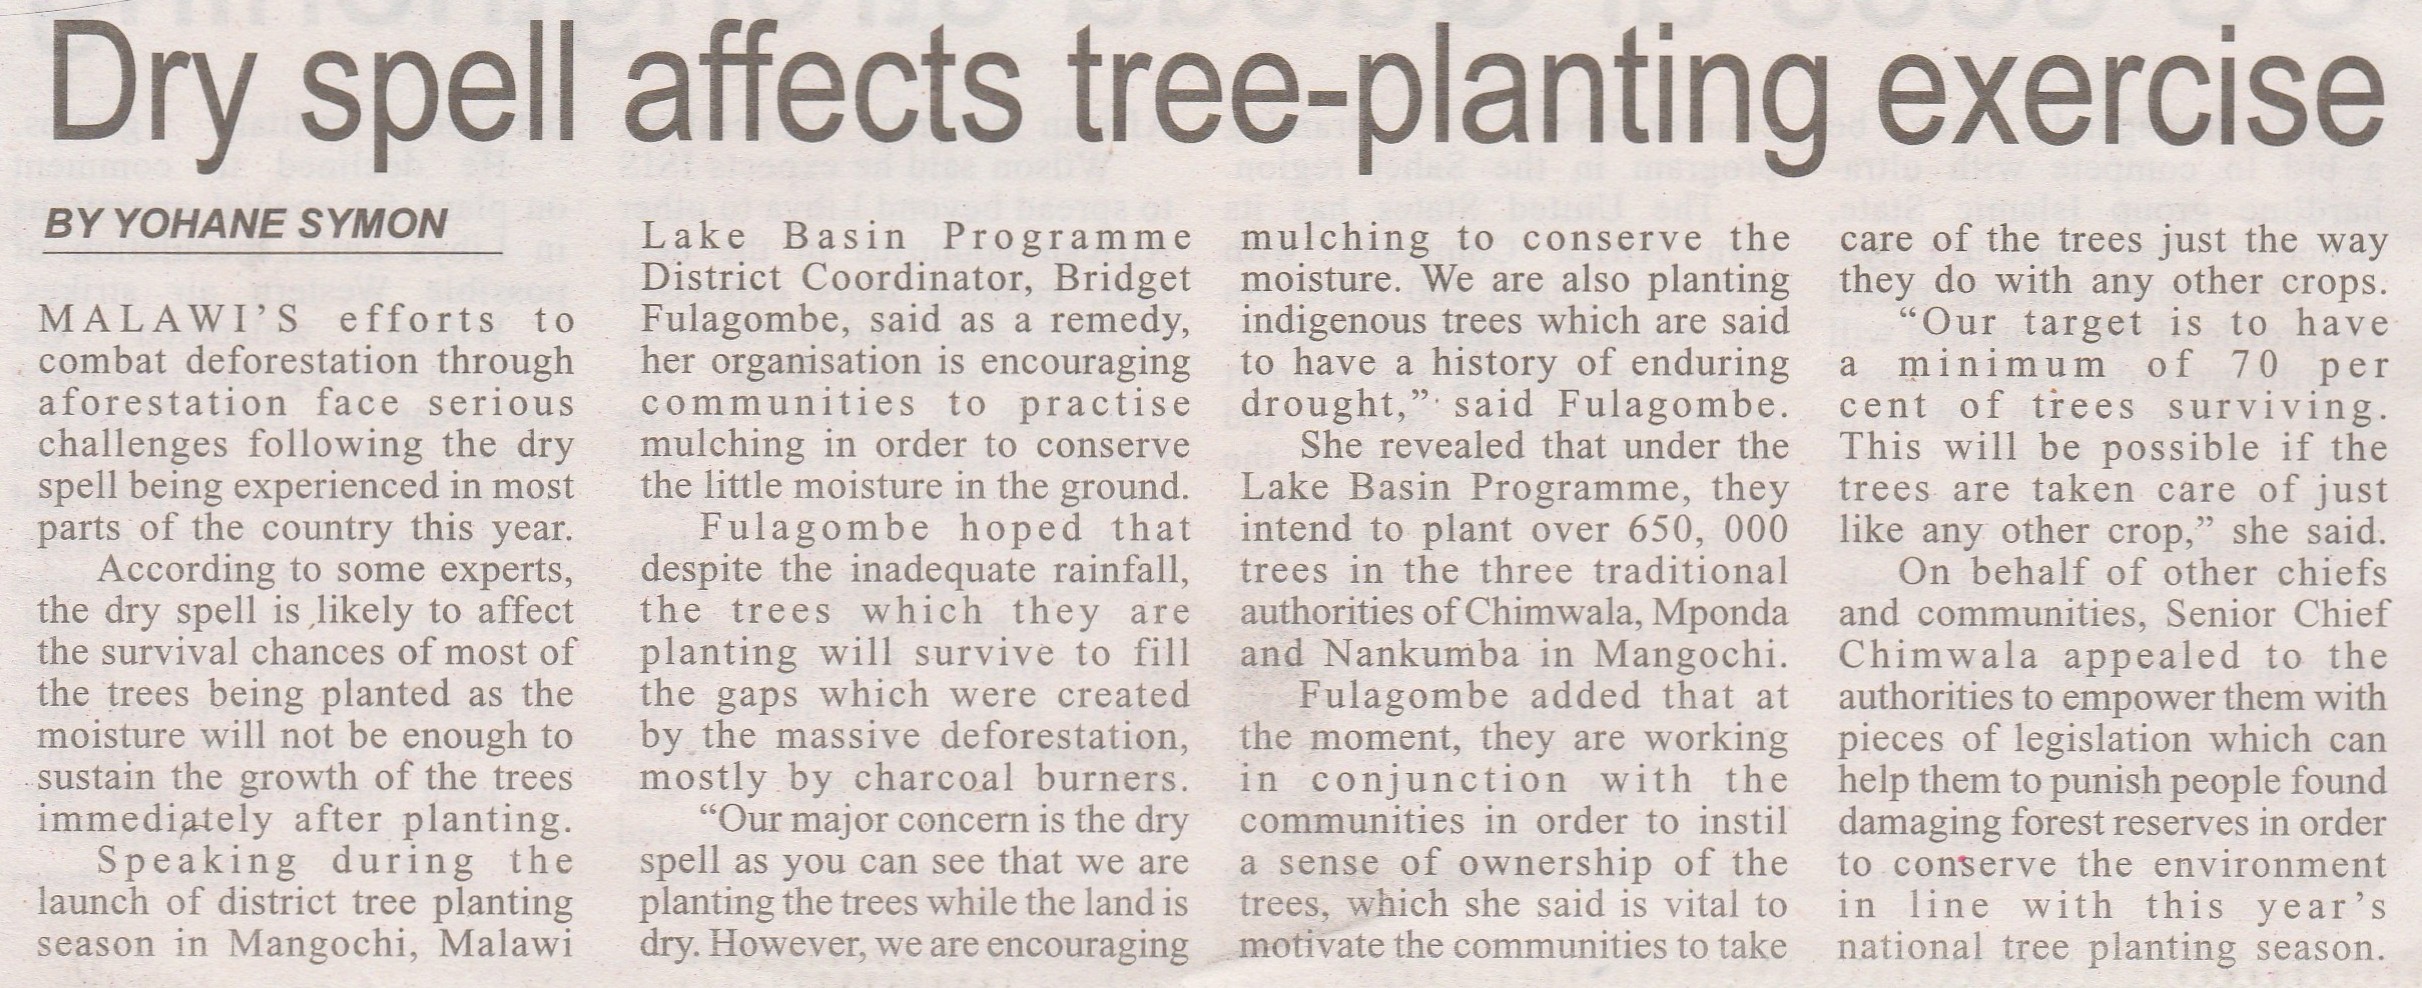 dry spell affects tree planting crop.jpg